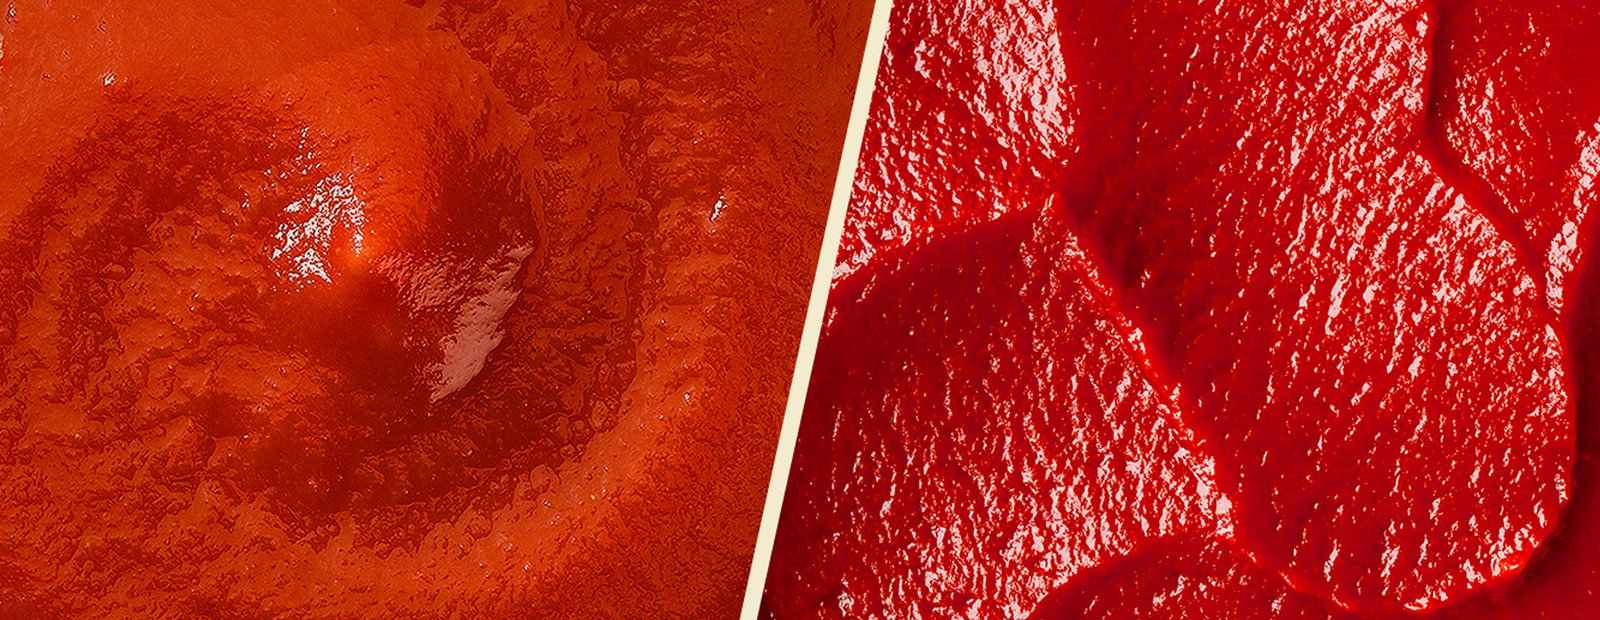 Tomato puree or tomato paste: which should you choose for your dishes?